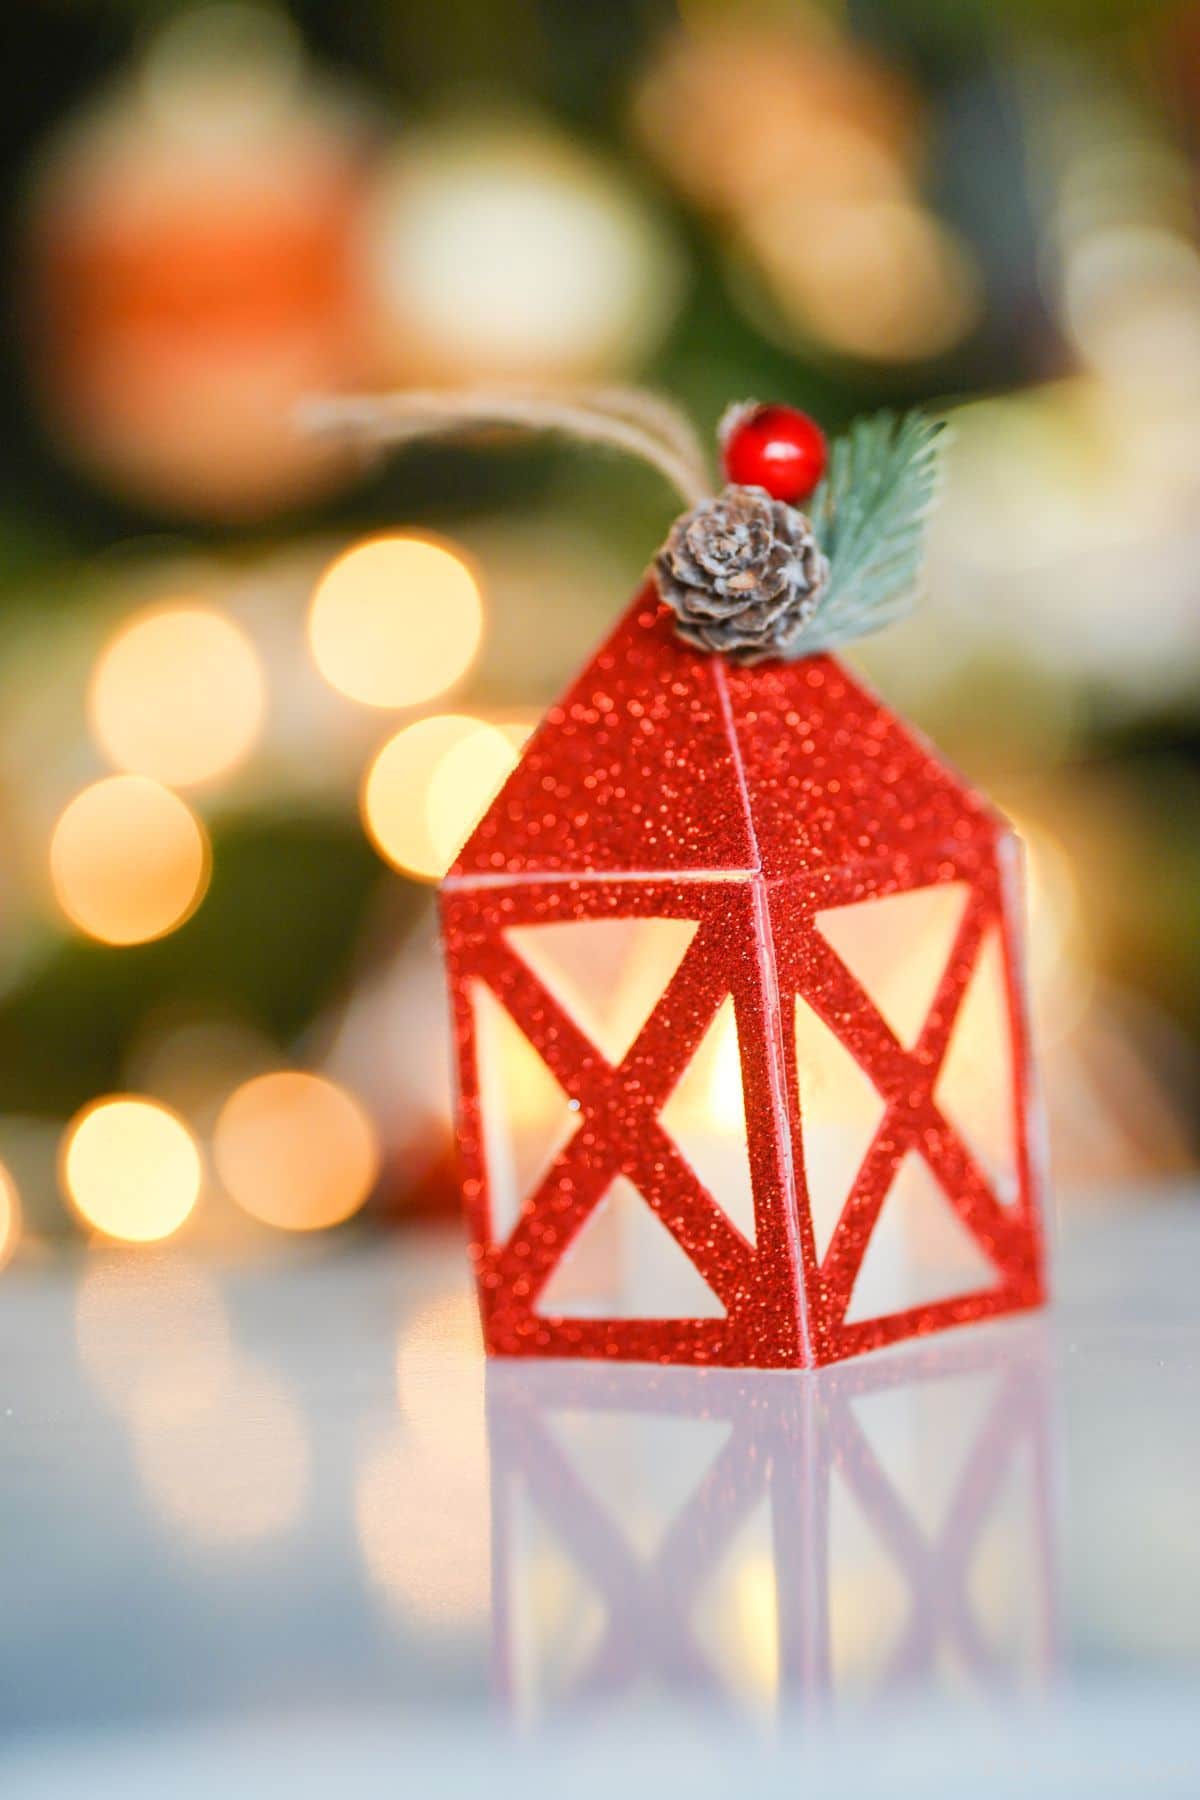 red glitter paper lantern on table by Christmas tree